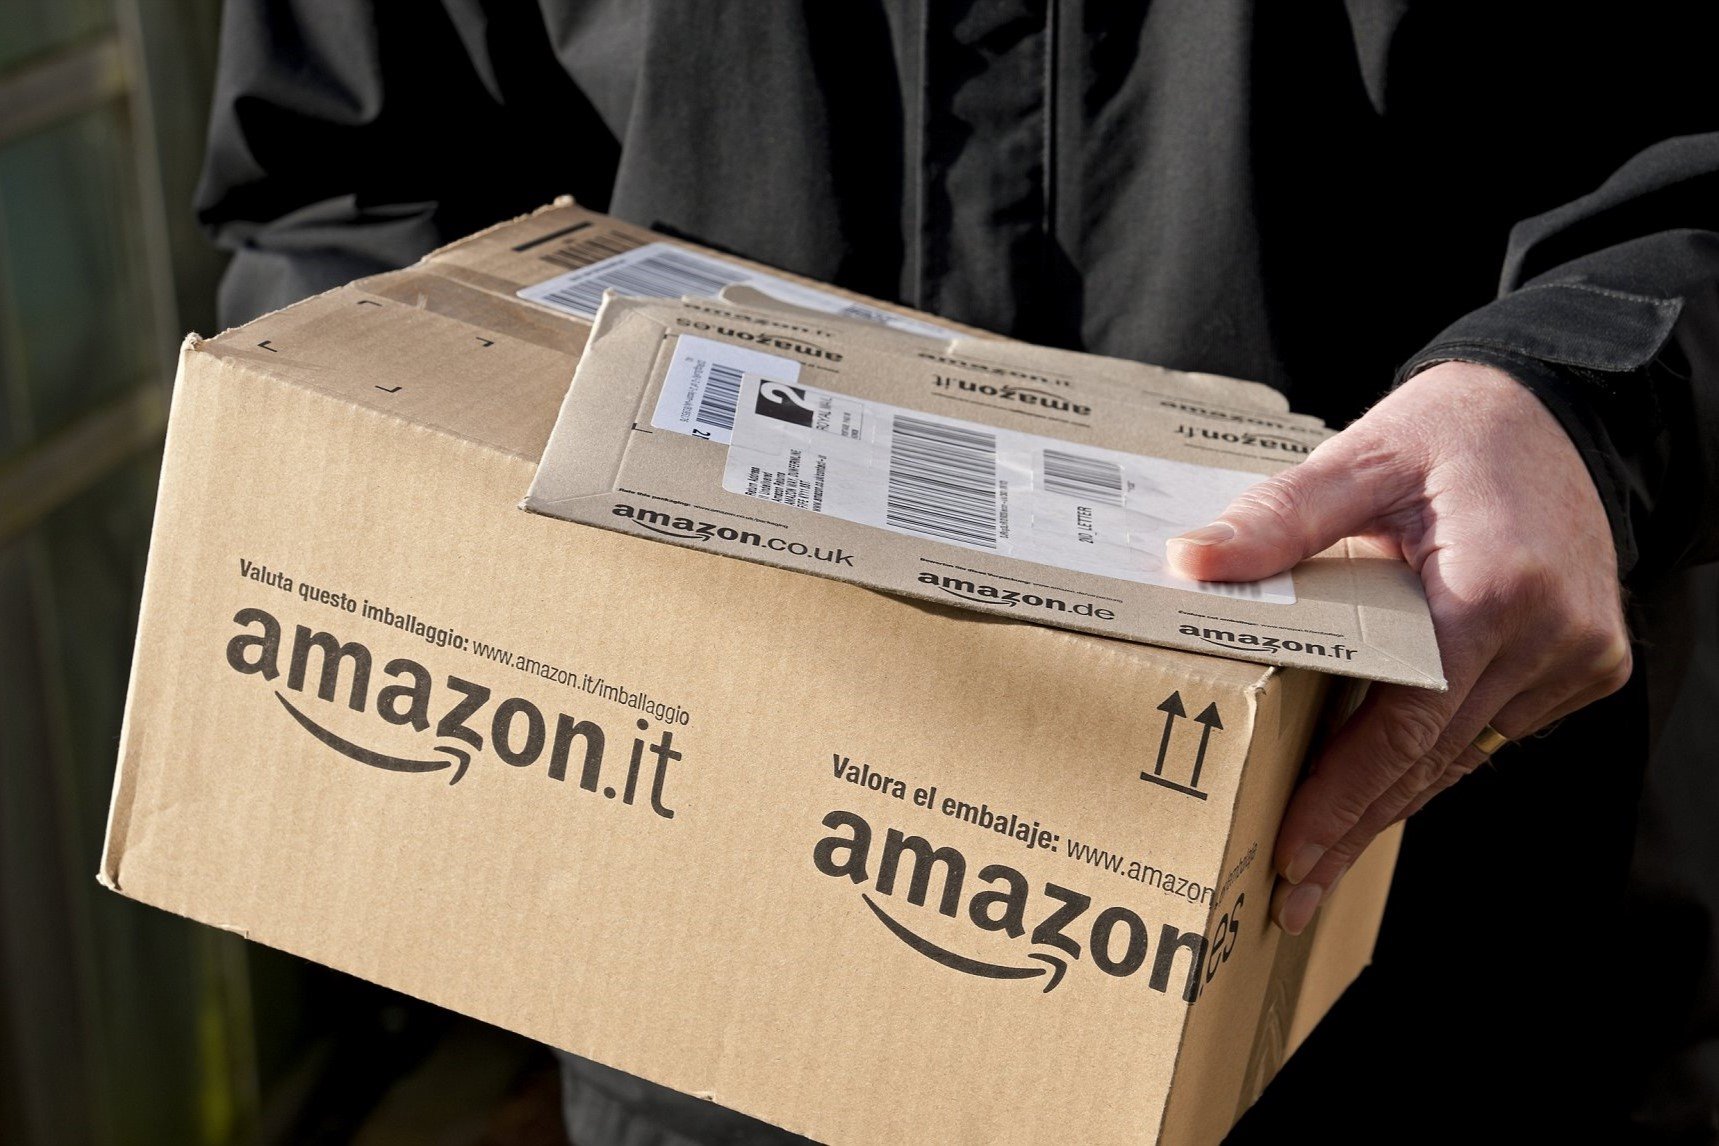 Amazon’s Sneaky Delivery Trick: Why You’ll Get Your Package Early